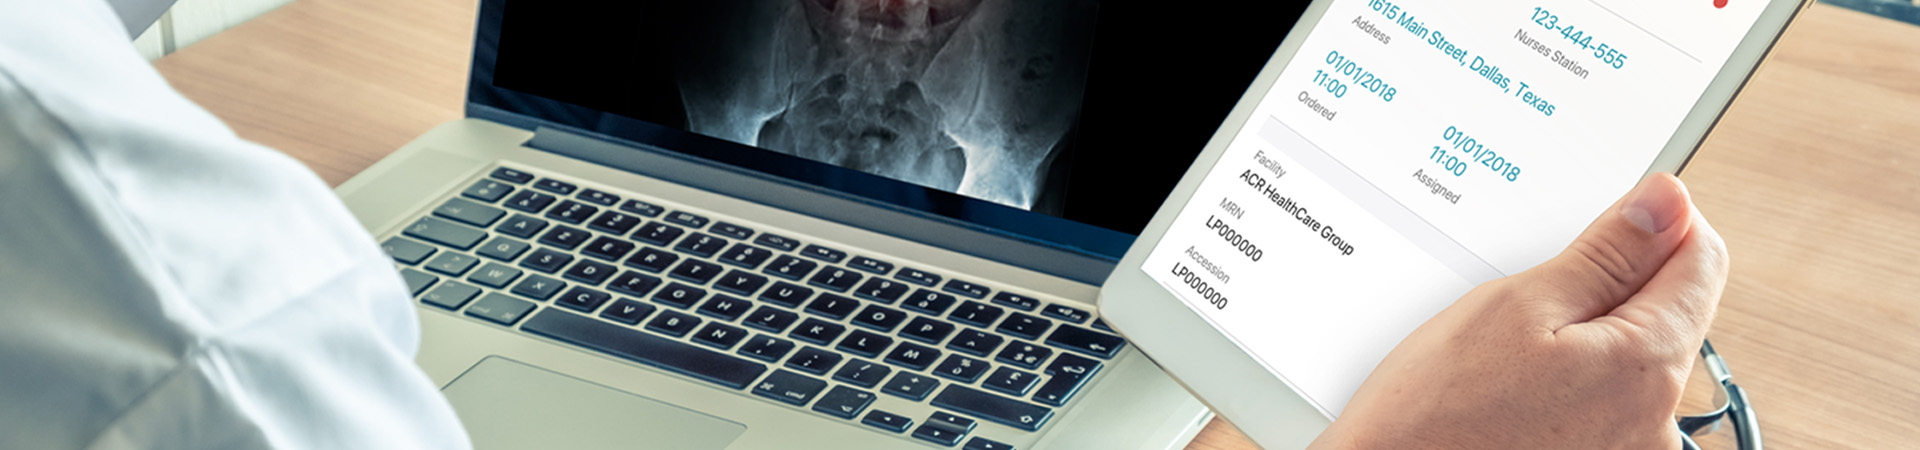 Development of an iOS/Android Mobile App for a Medical Imaging Company  